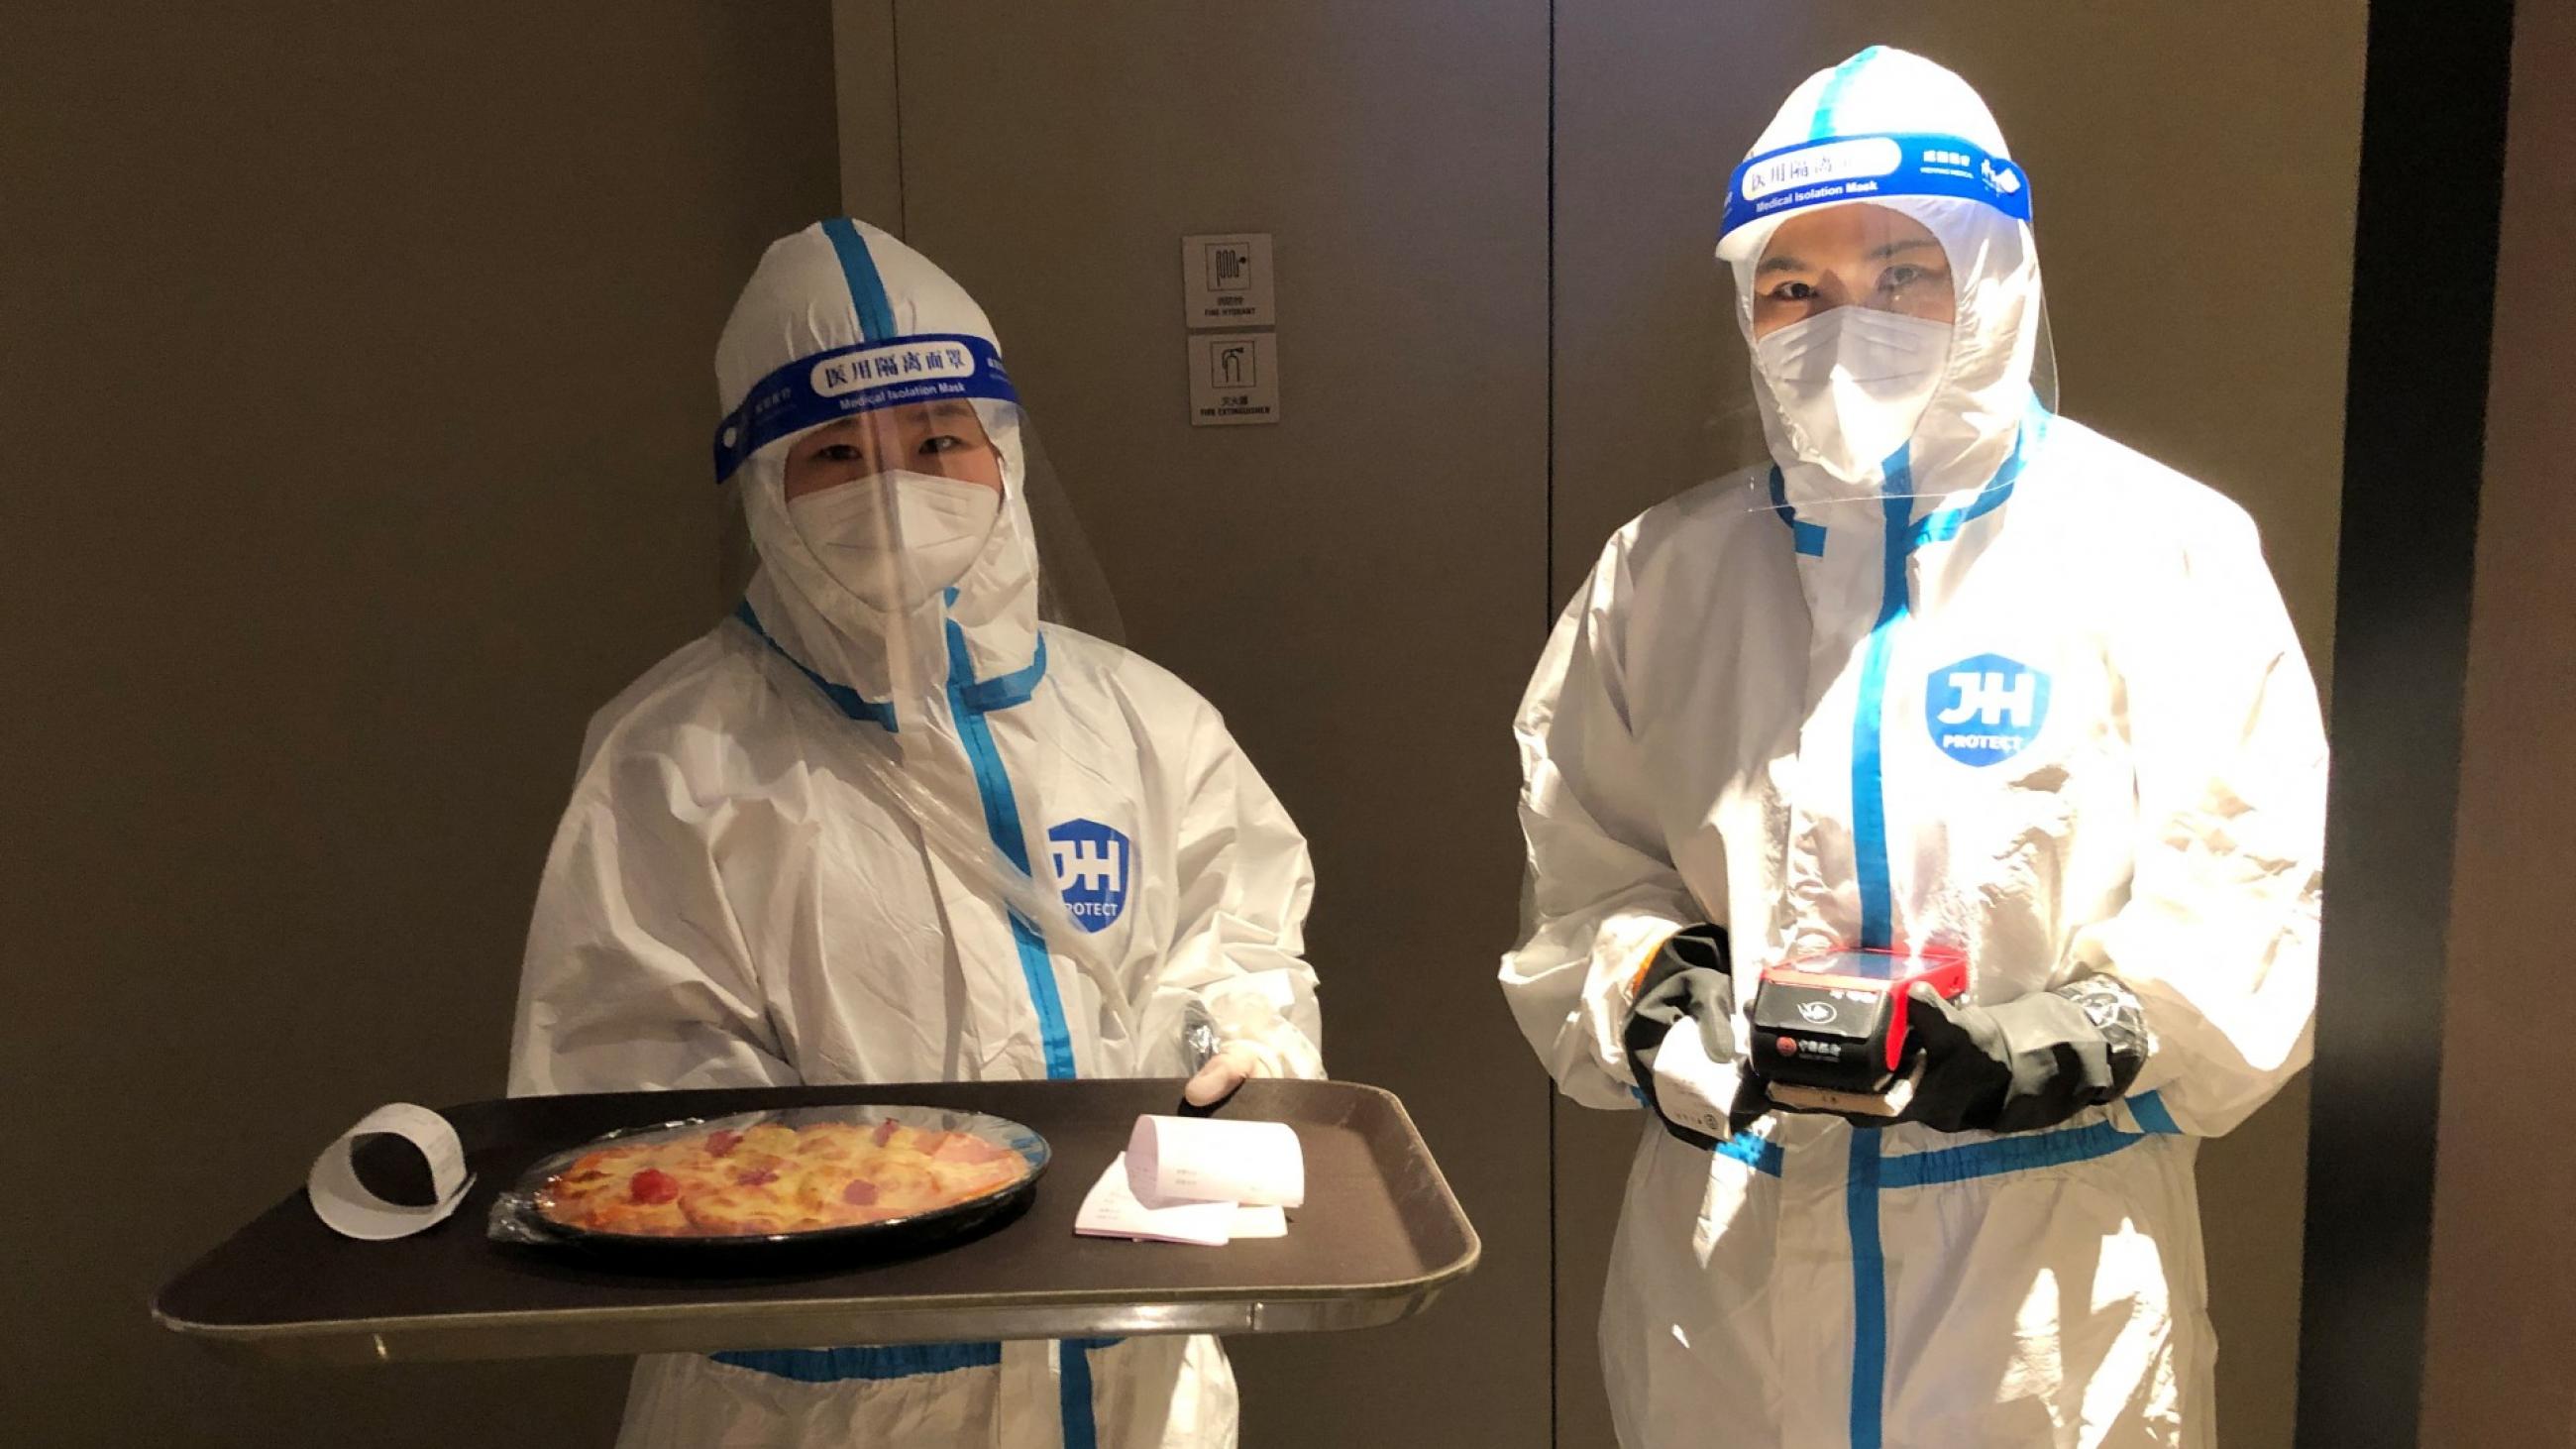 Two hotel staff wearing personal protective equipment (PPE) deliver a Margherita pizza wrapped in cling film that was ordered with room service at a hotel for journalists and officials o